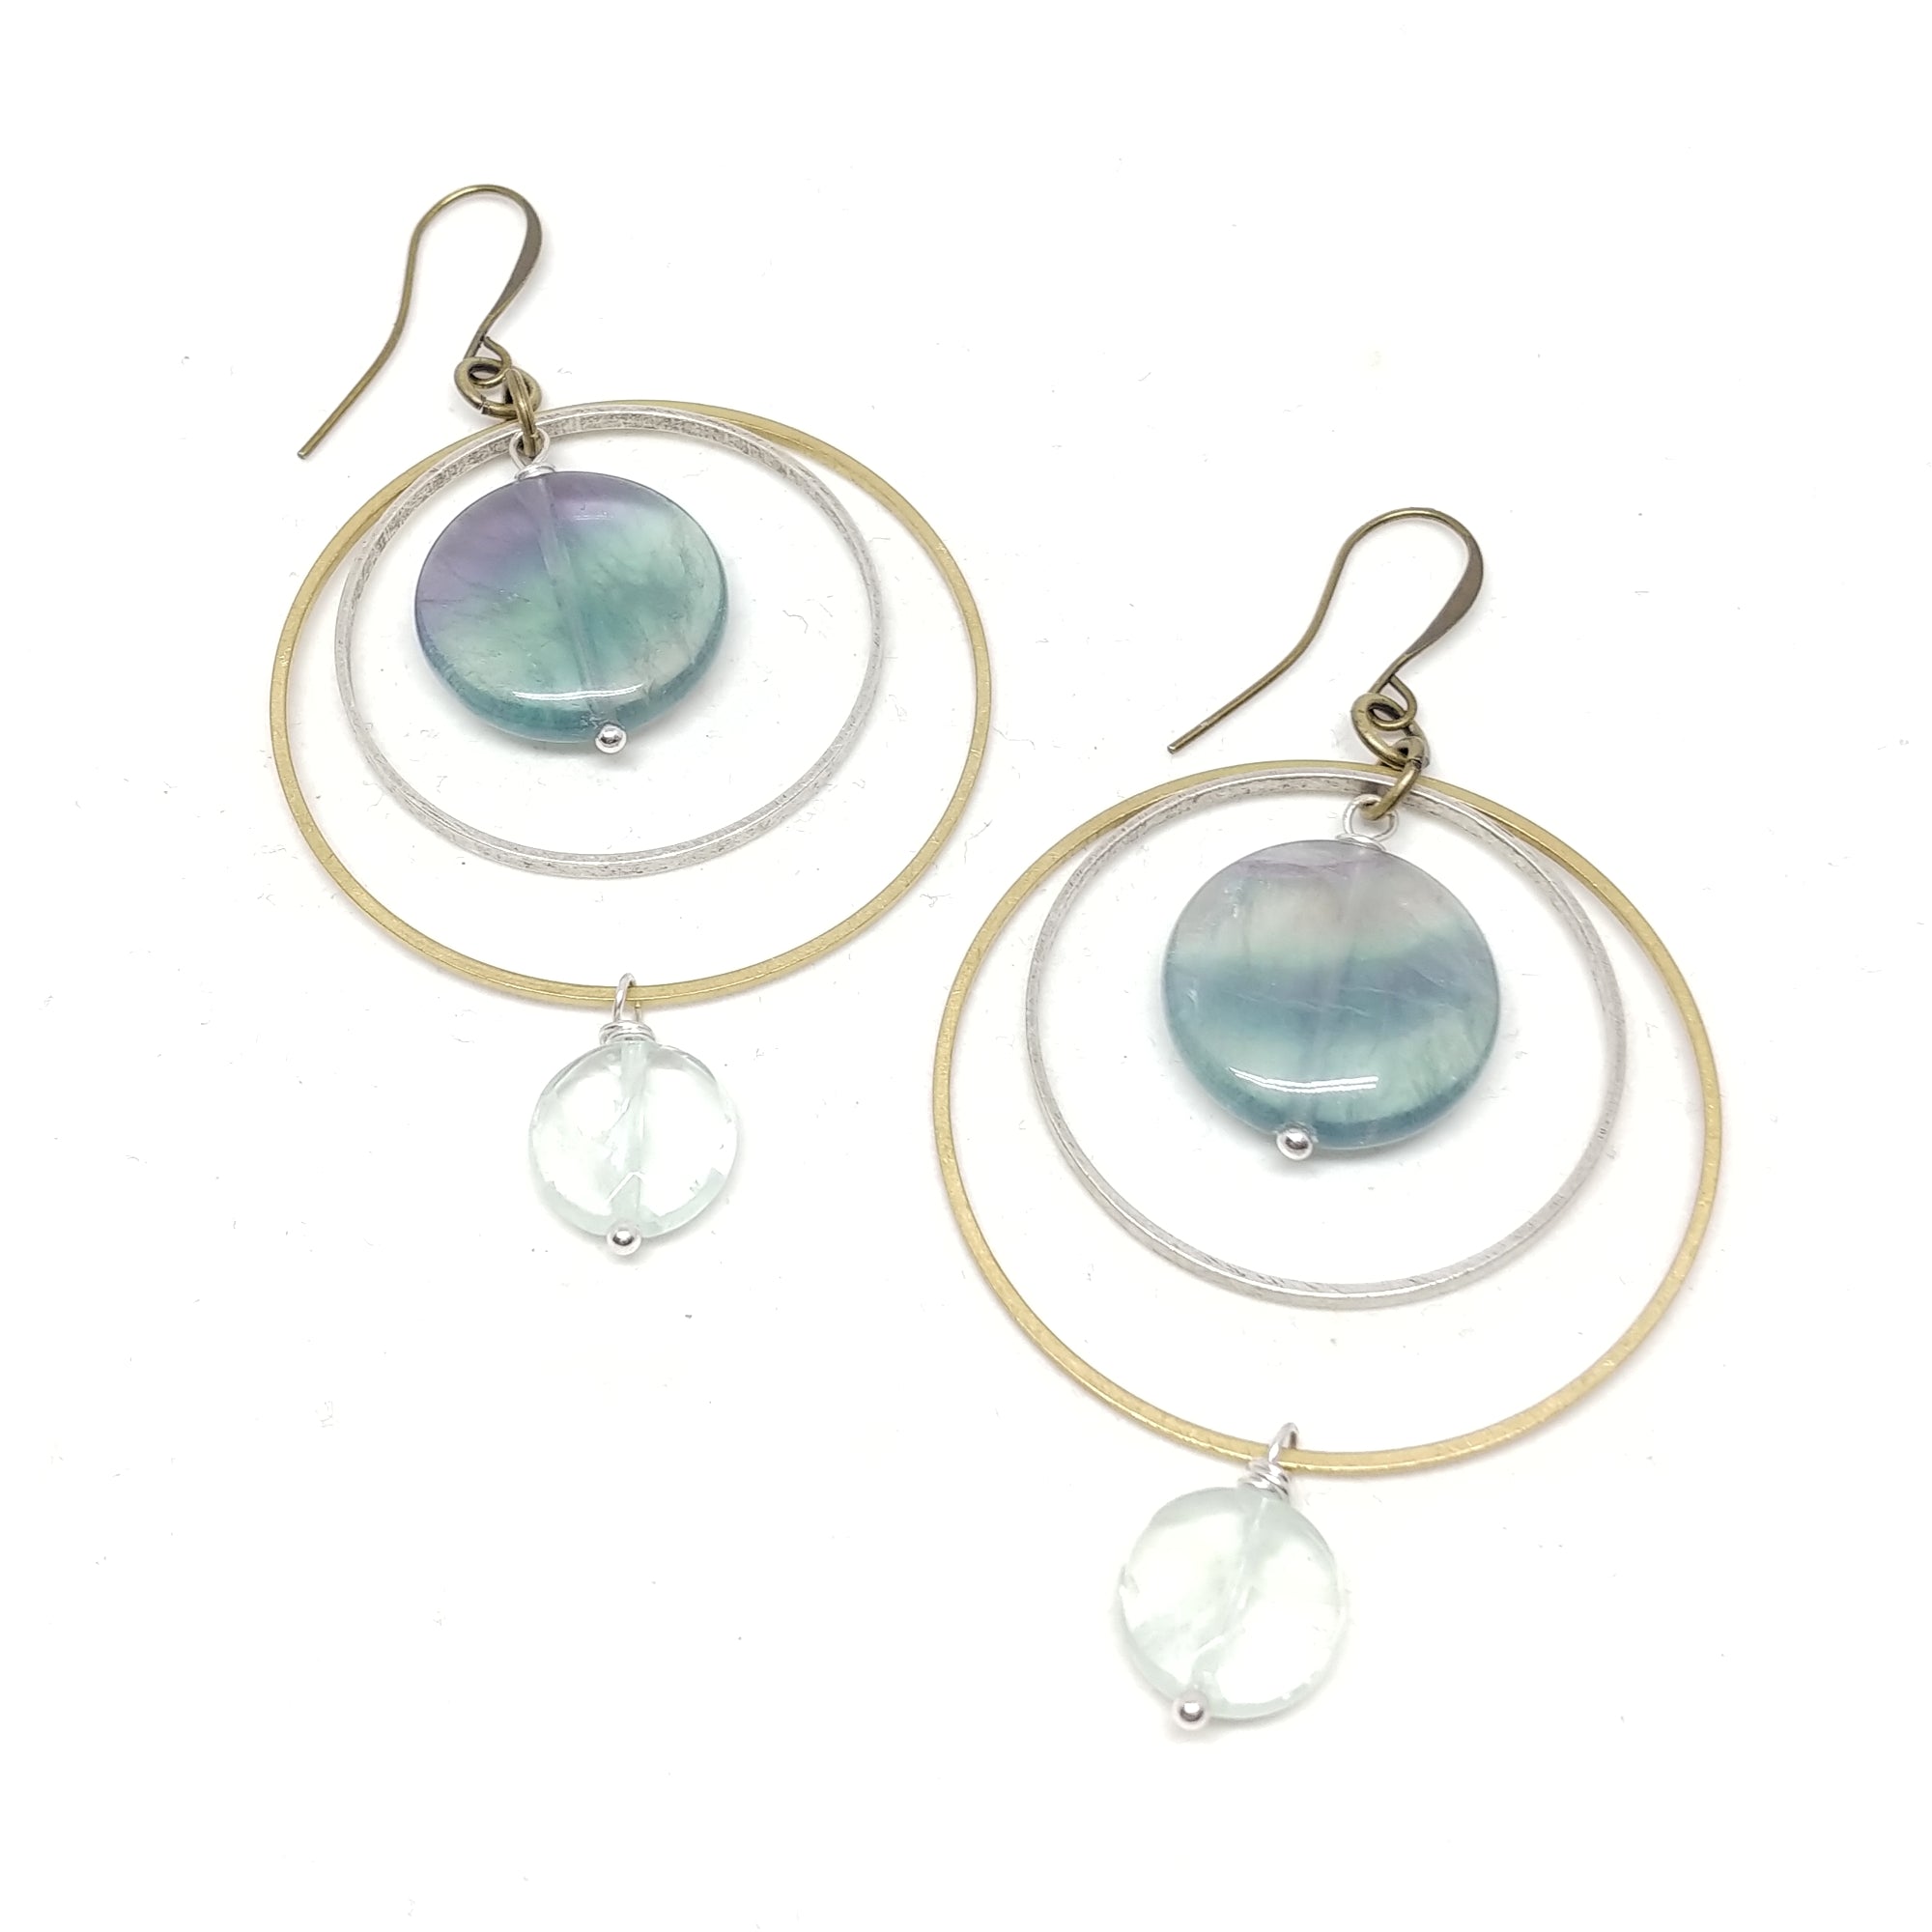 Flourite Mixed Metal Hoops, Mother's Day Citrus Perfume Gift Set